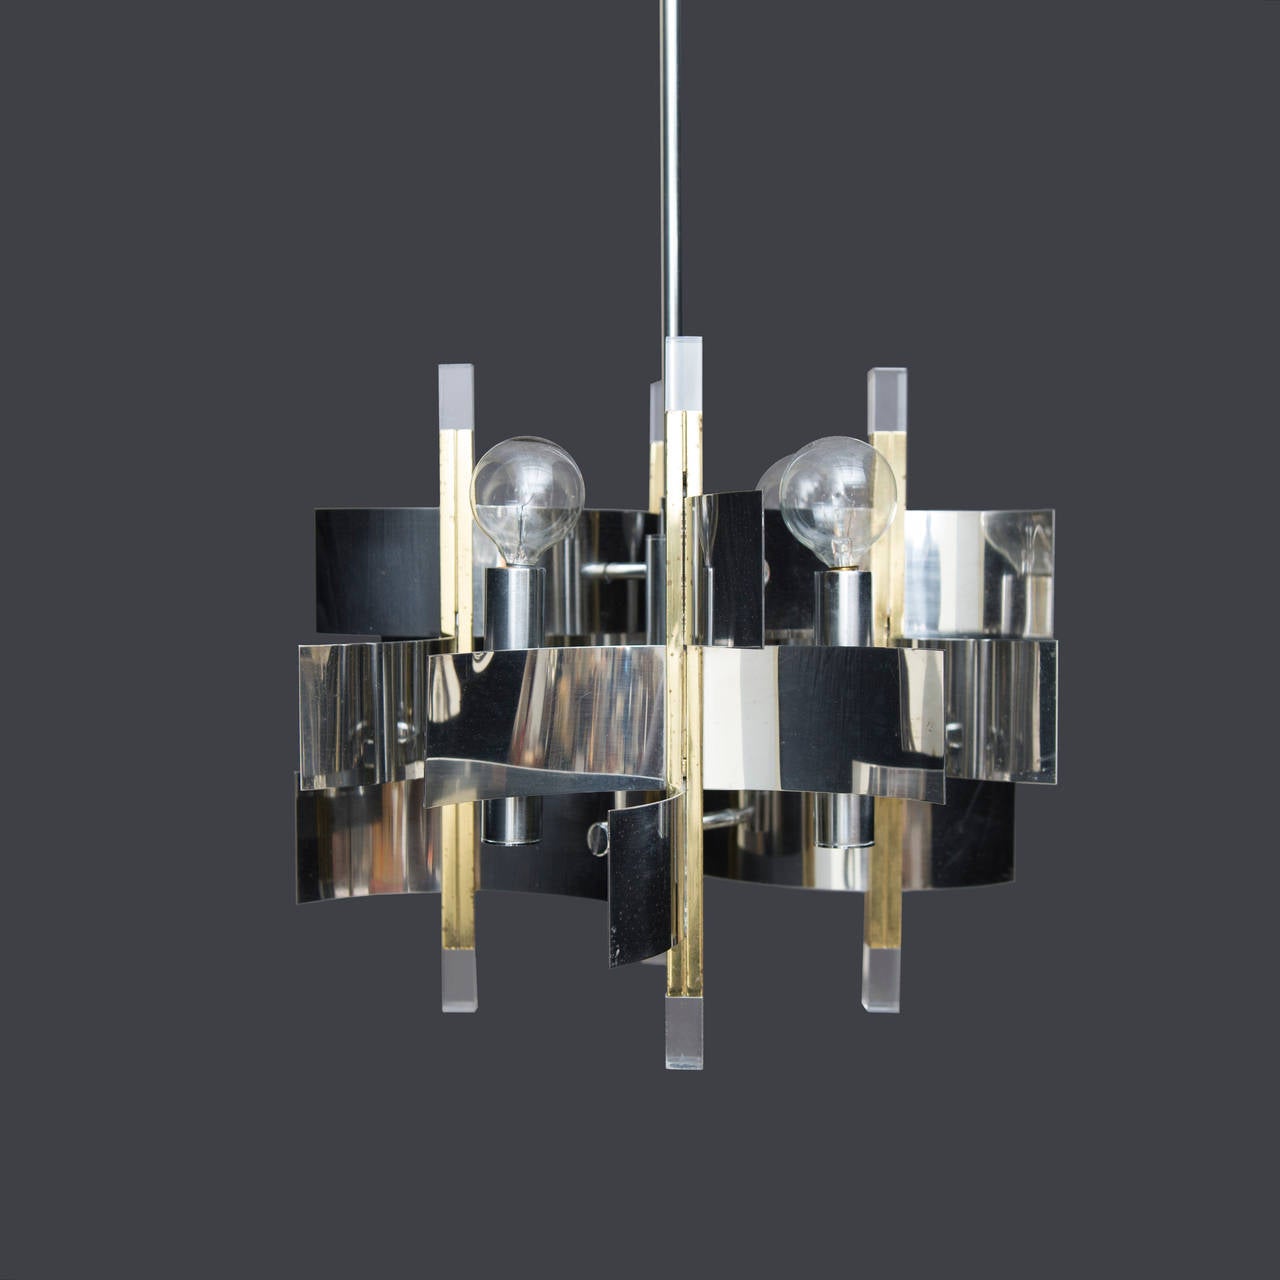 Lucite and mixed metal Gaetano Sciolari chandelier - an intriguing design with a Brutalist flair